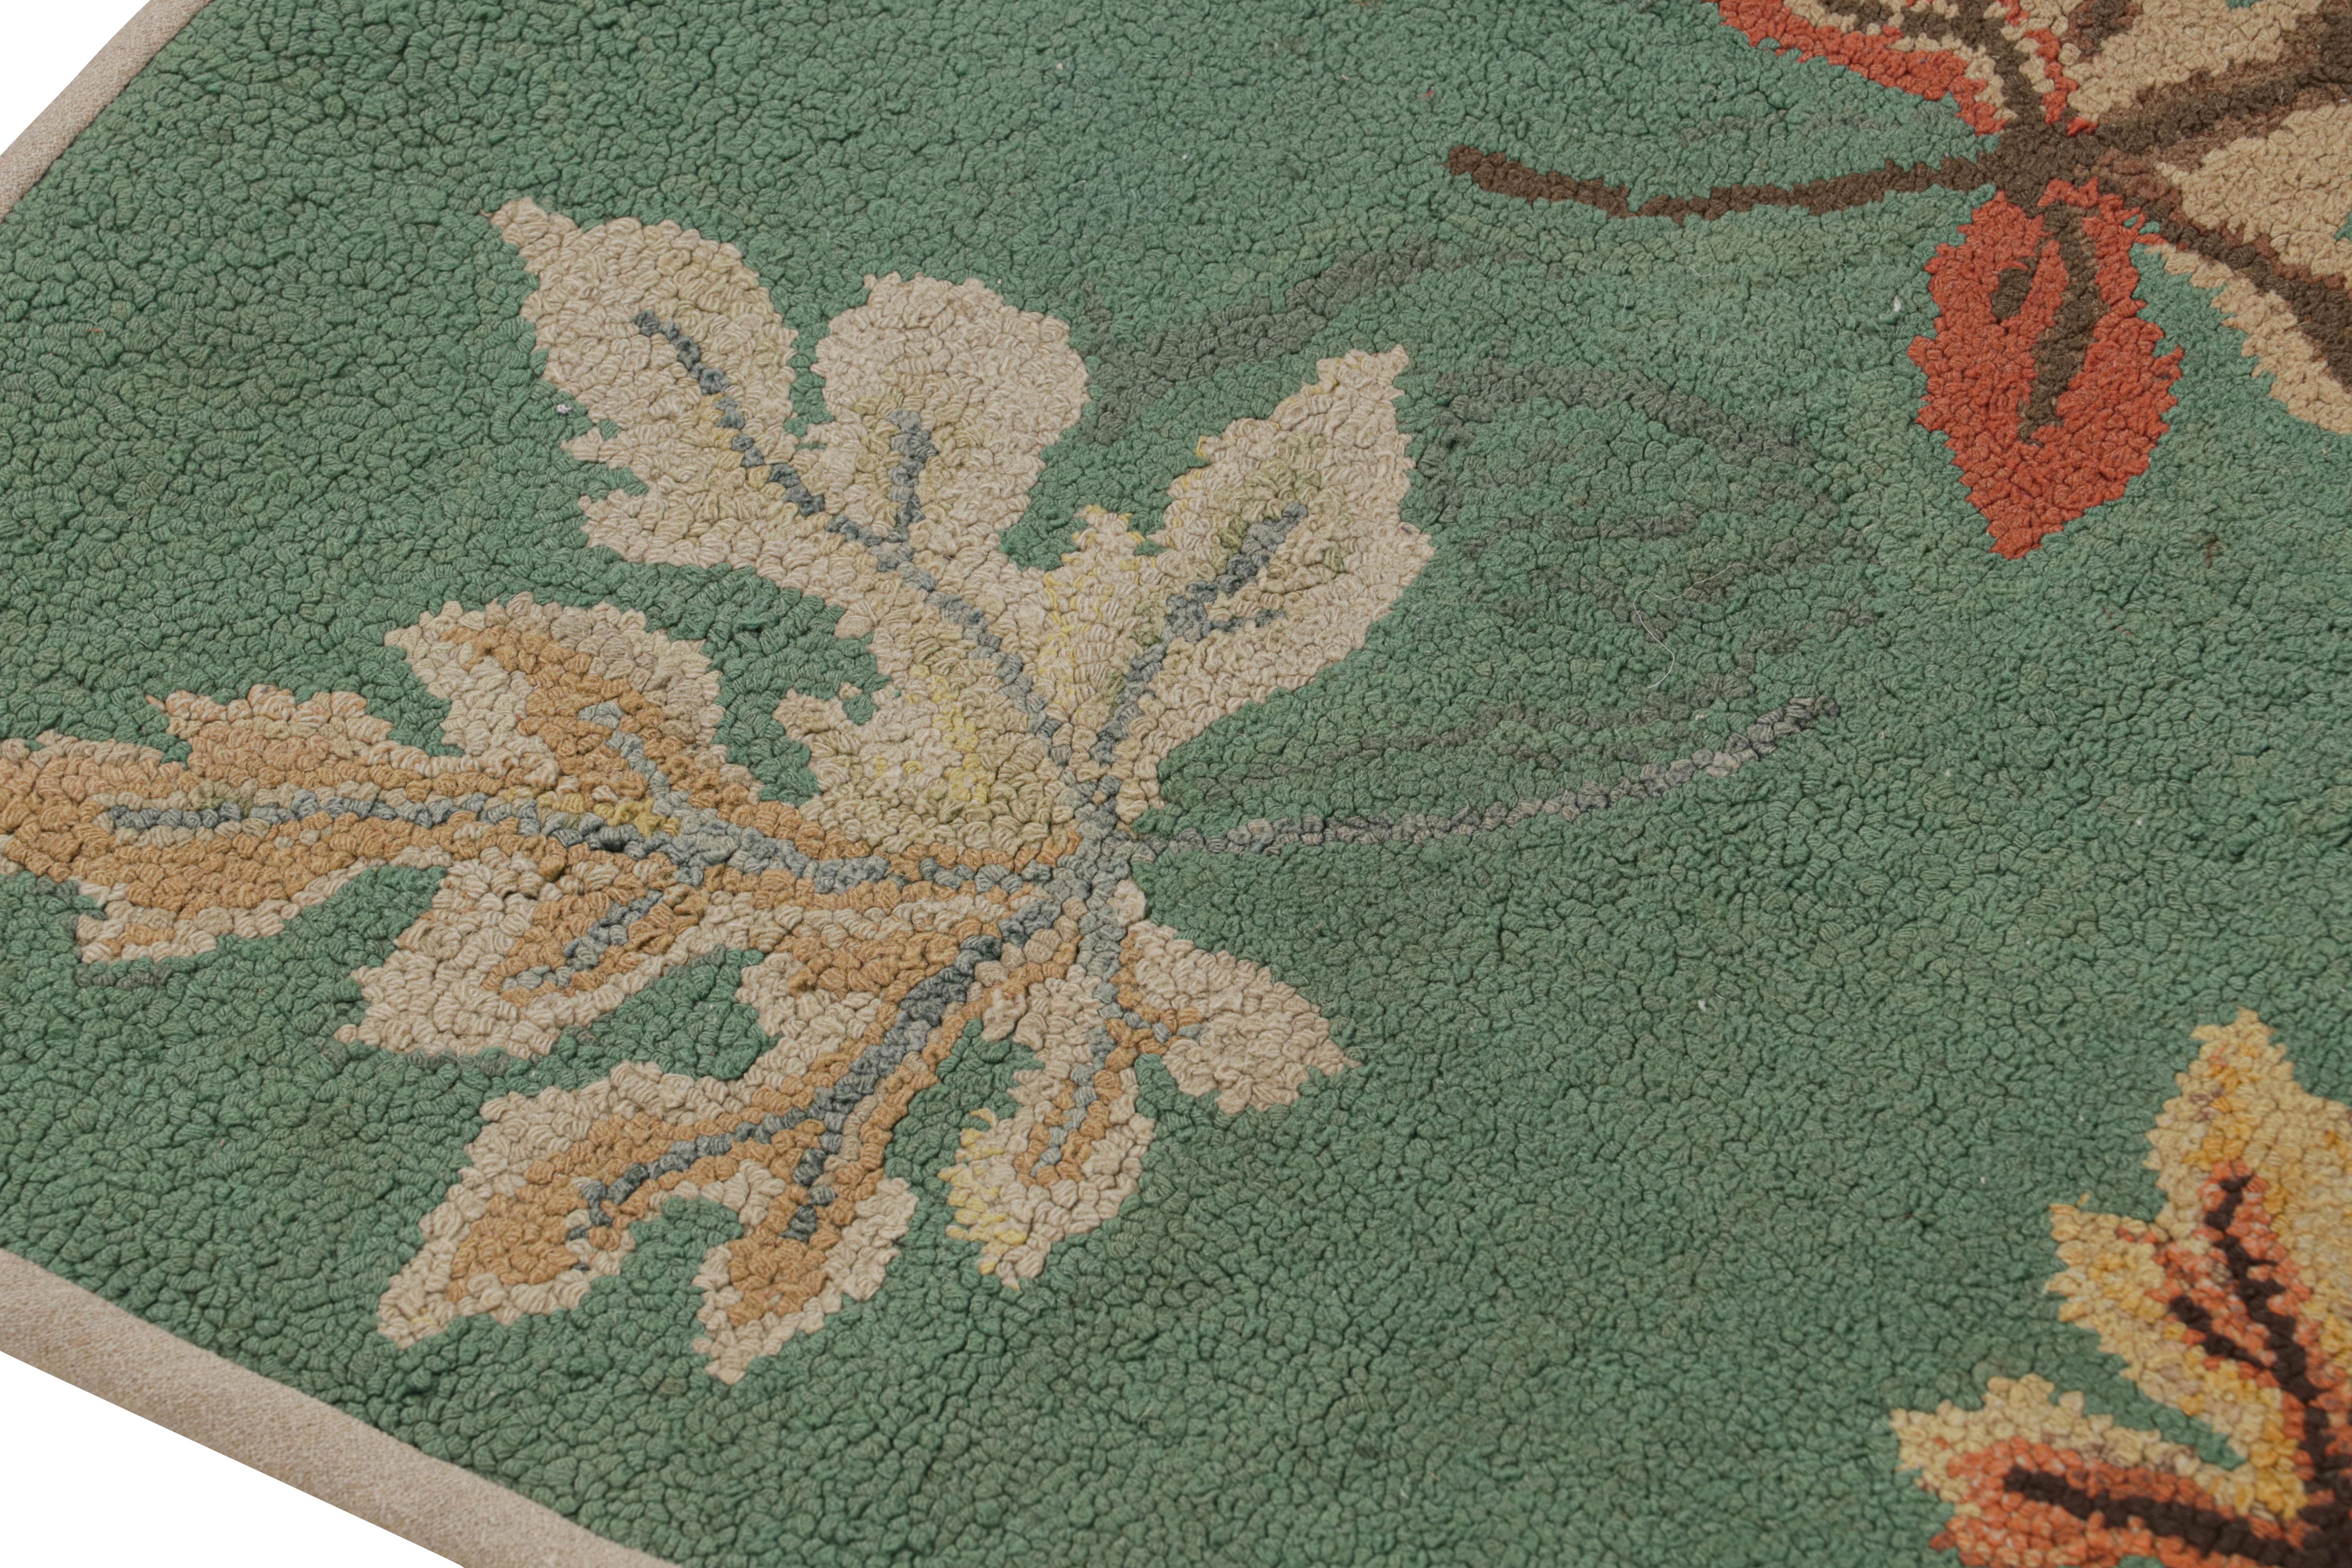 Hand-Knotted Antique Hooked Rug in Seafoam with Leaf Floral Patterns, from Rug & Kilim For Sale